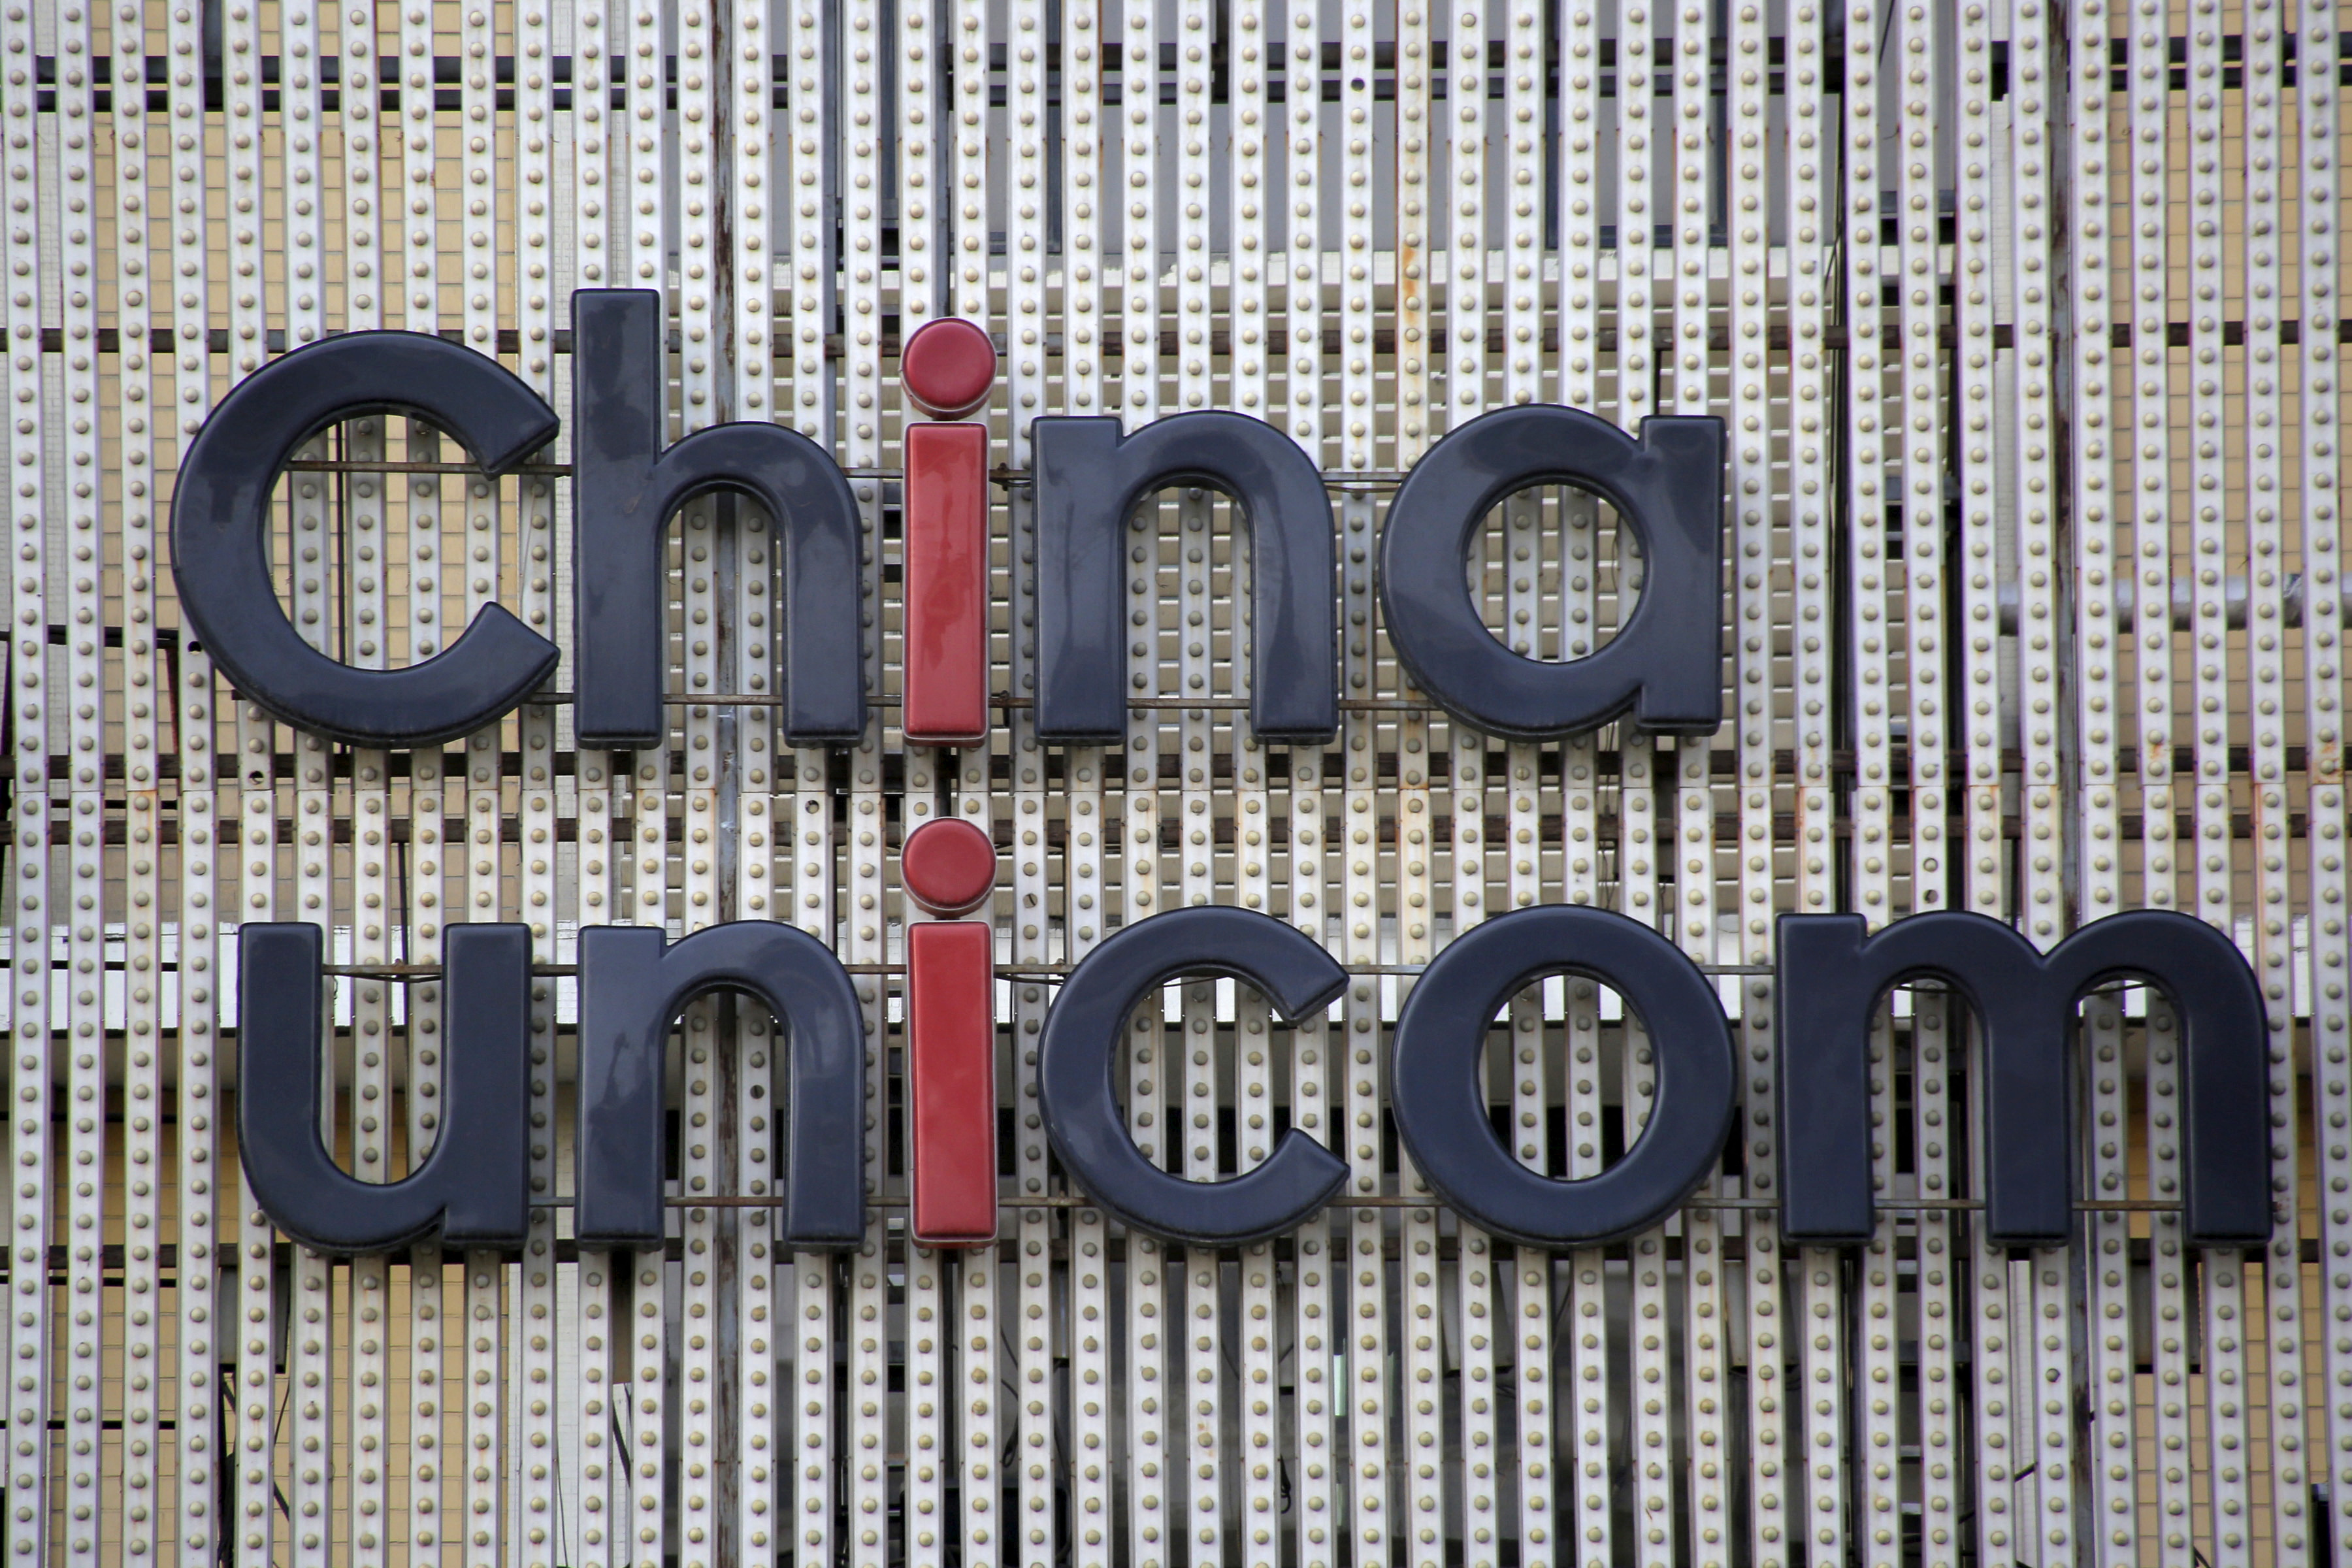 China Unicom's company logo is seen at its branch office in Beijing, China, April 21, 2016.REUTERS/Kim Kyung-Hoon/File Photo             GLOBAL BUSINESS WEEK AHEAD PACKAGE    SEARCH BUSINESS WEEK AHEAD 17 OCT FOR ALL IMAGES